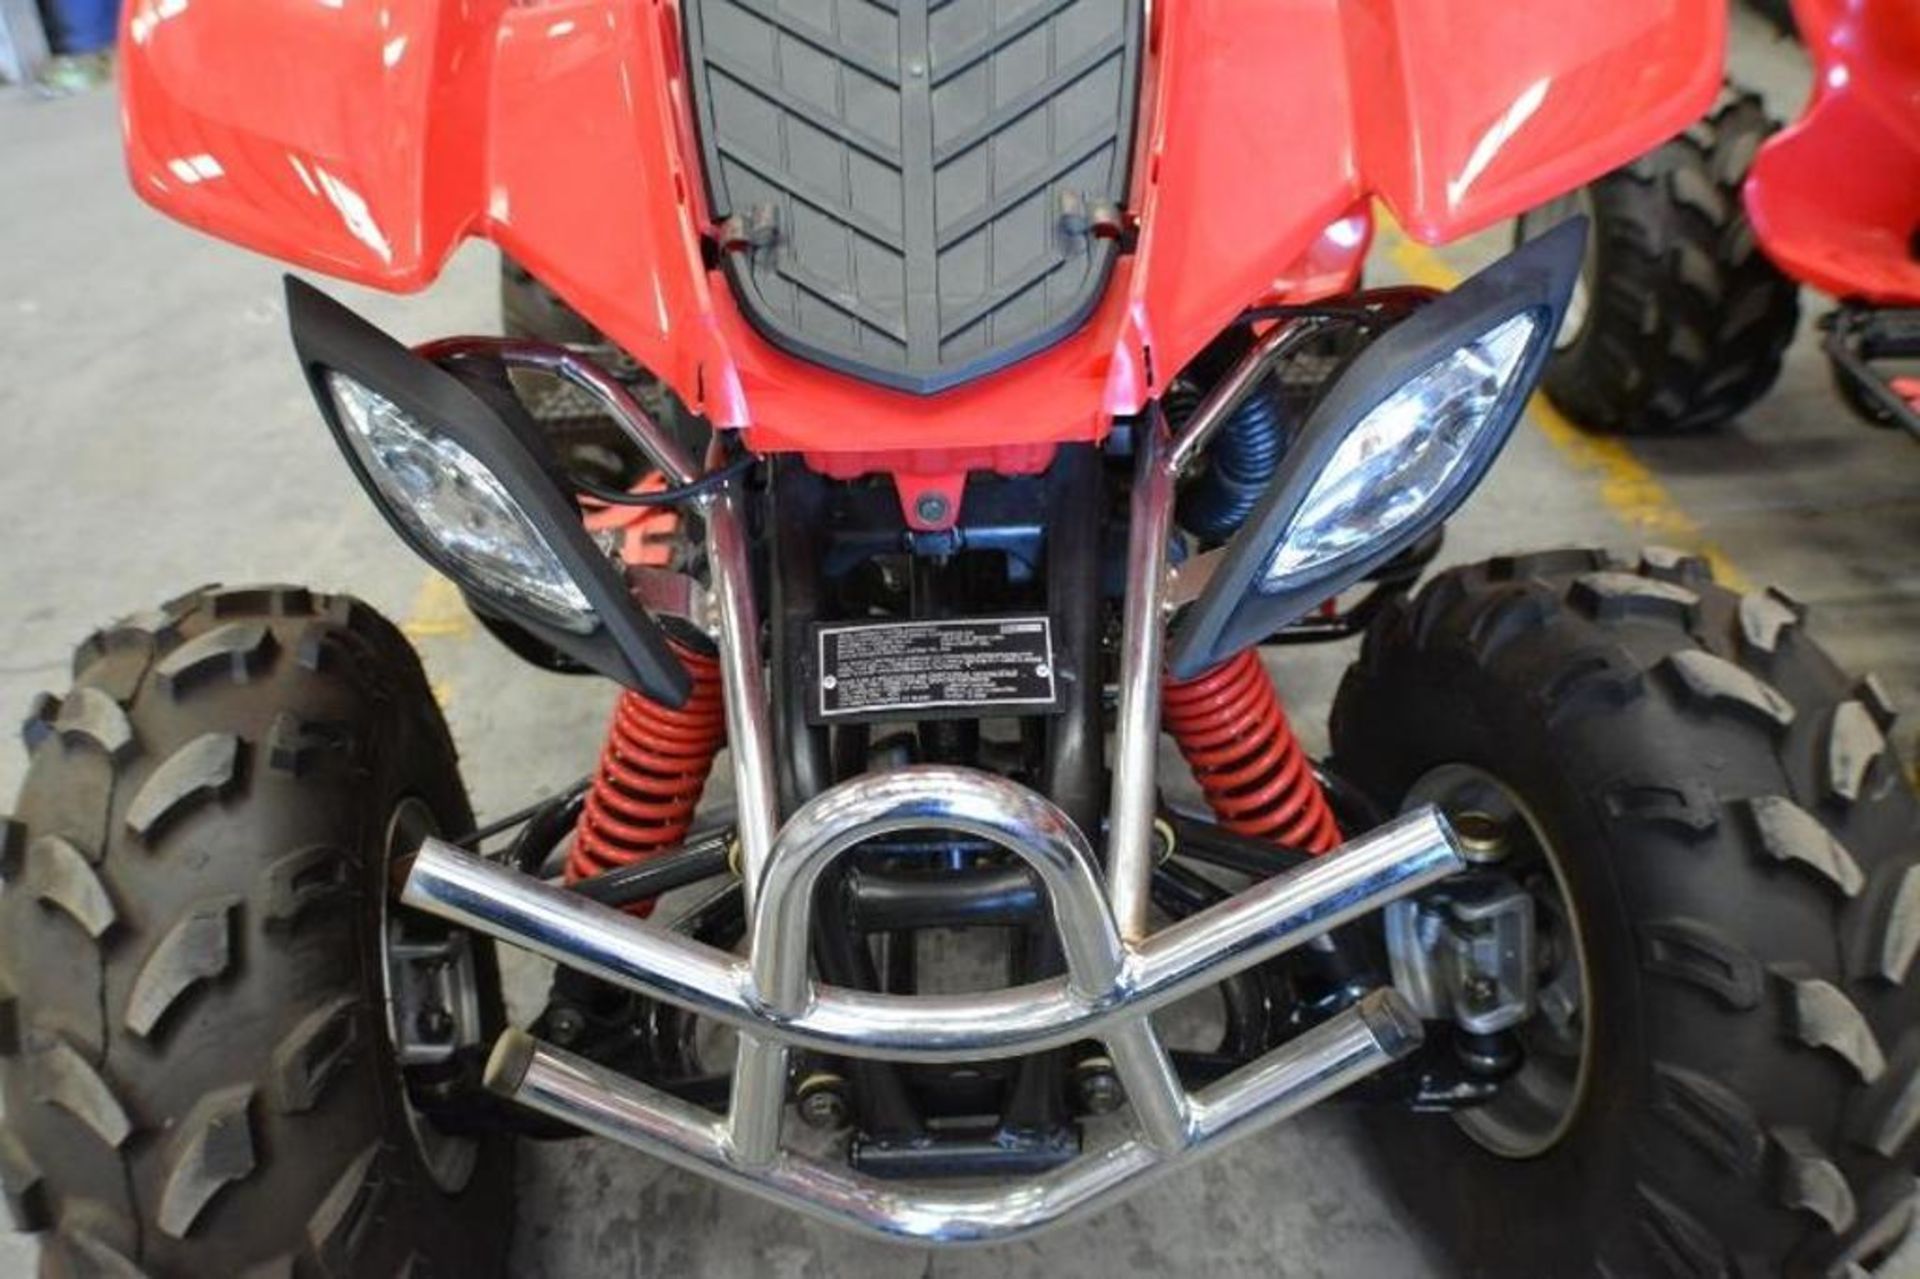 ATV 150cc 4 Stroke. Red Color. For Repair. This unit are for EXPORT ONLY. Buyers acknowledges is for - Image 2 of 11